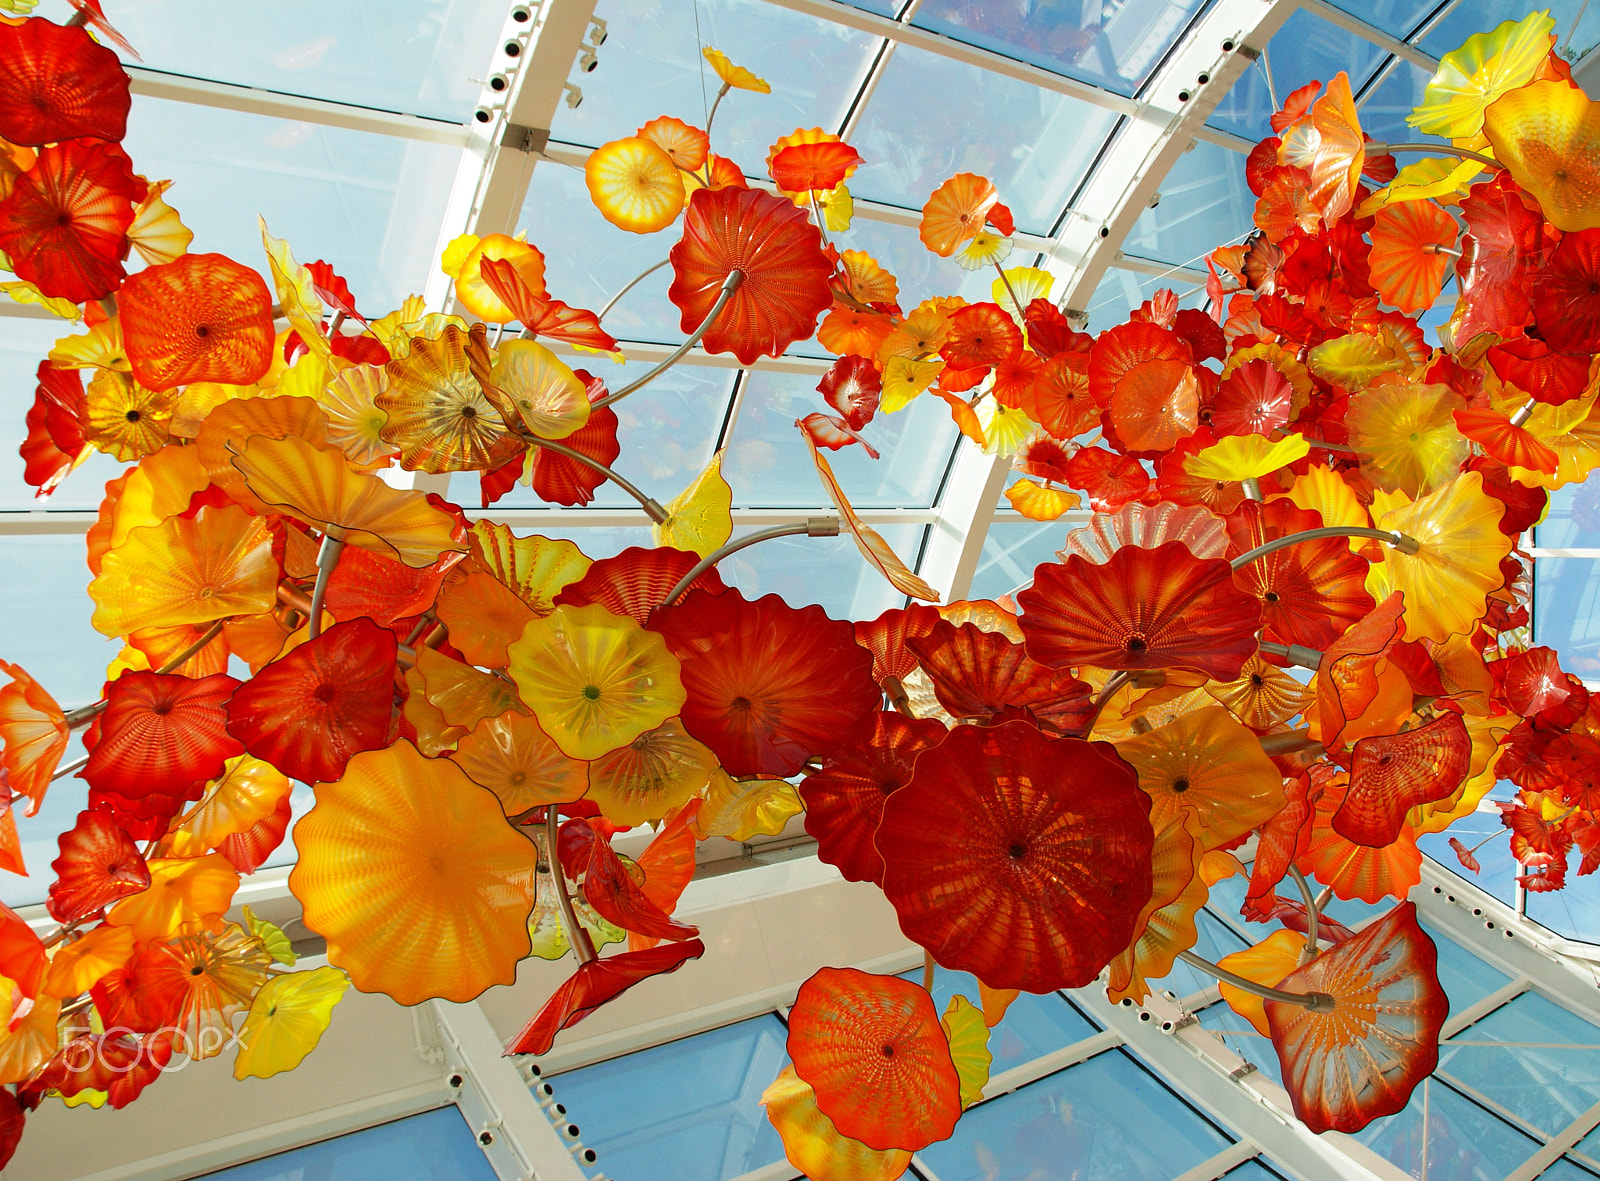 Nikon D80 sample photo. Chihuly garden photography